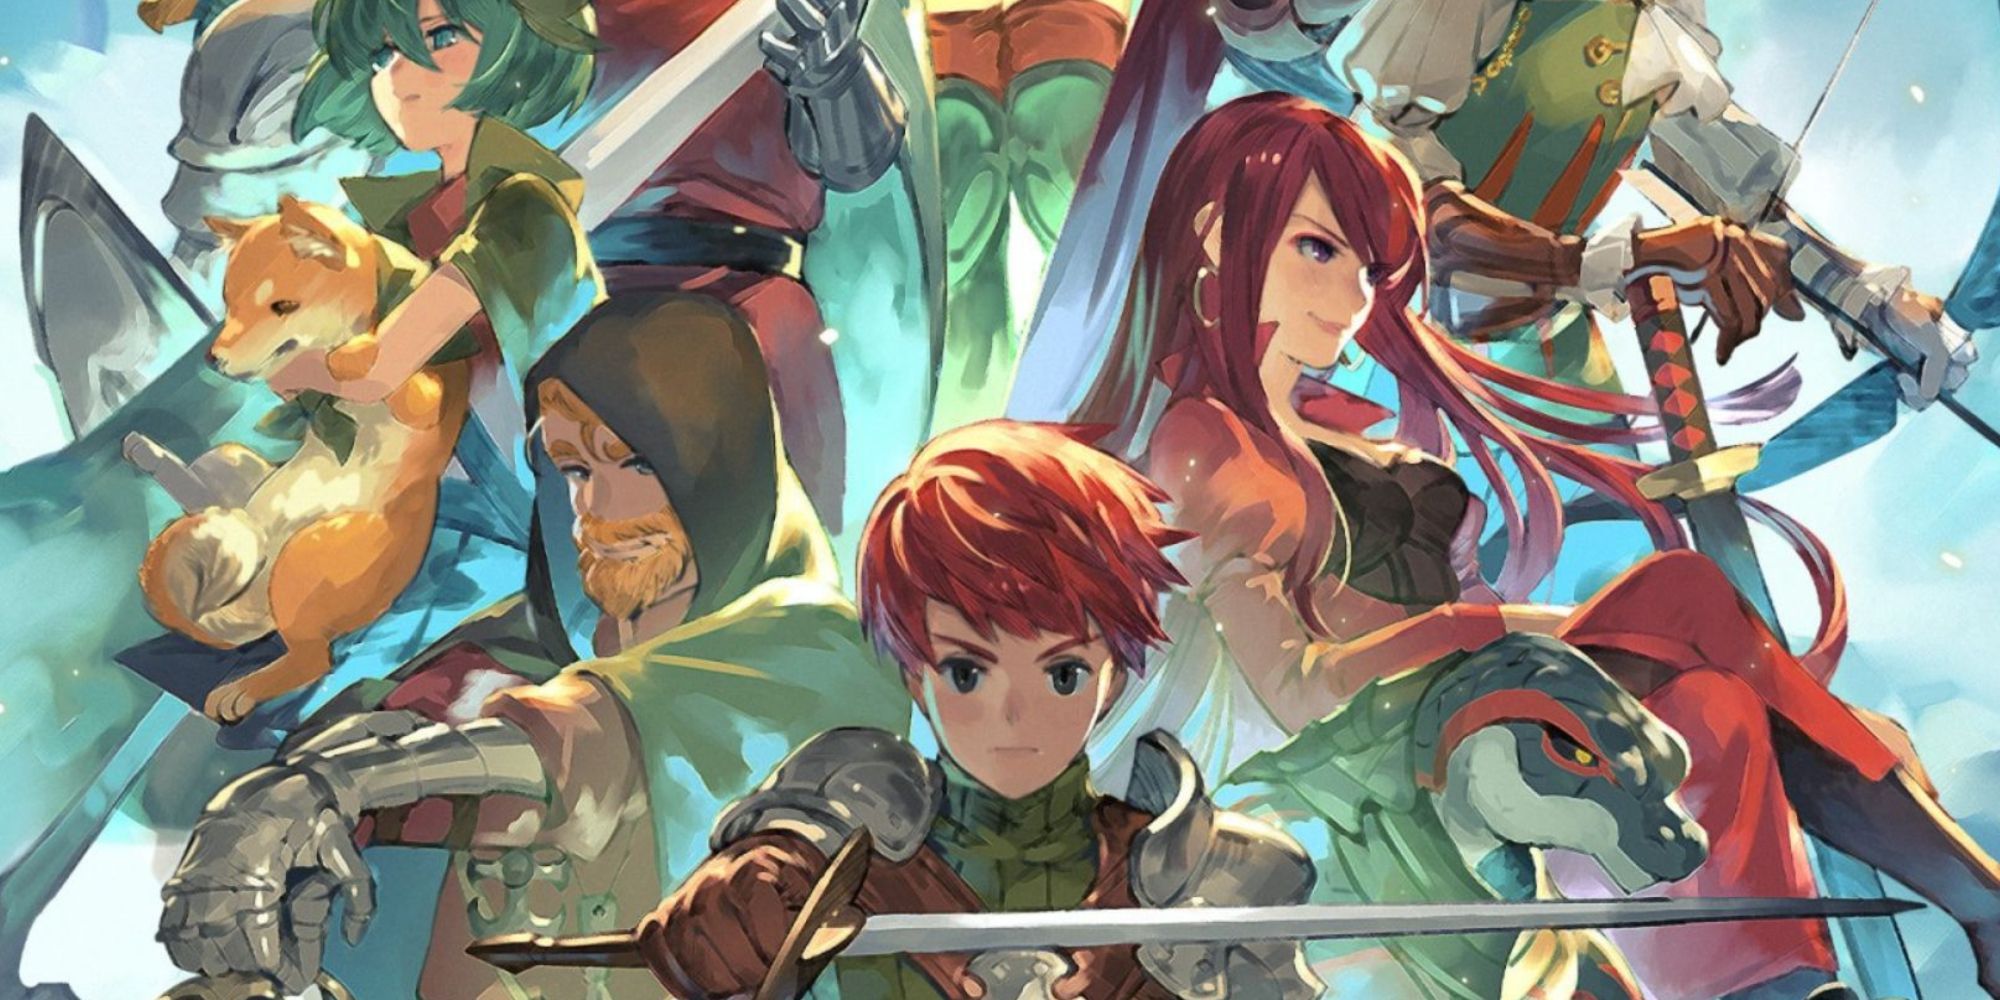 Chained Echoes promotional image showing the cast of the game.